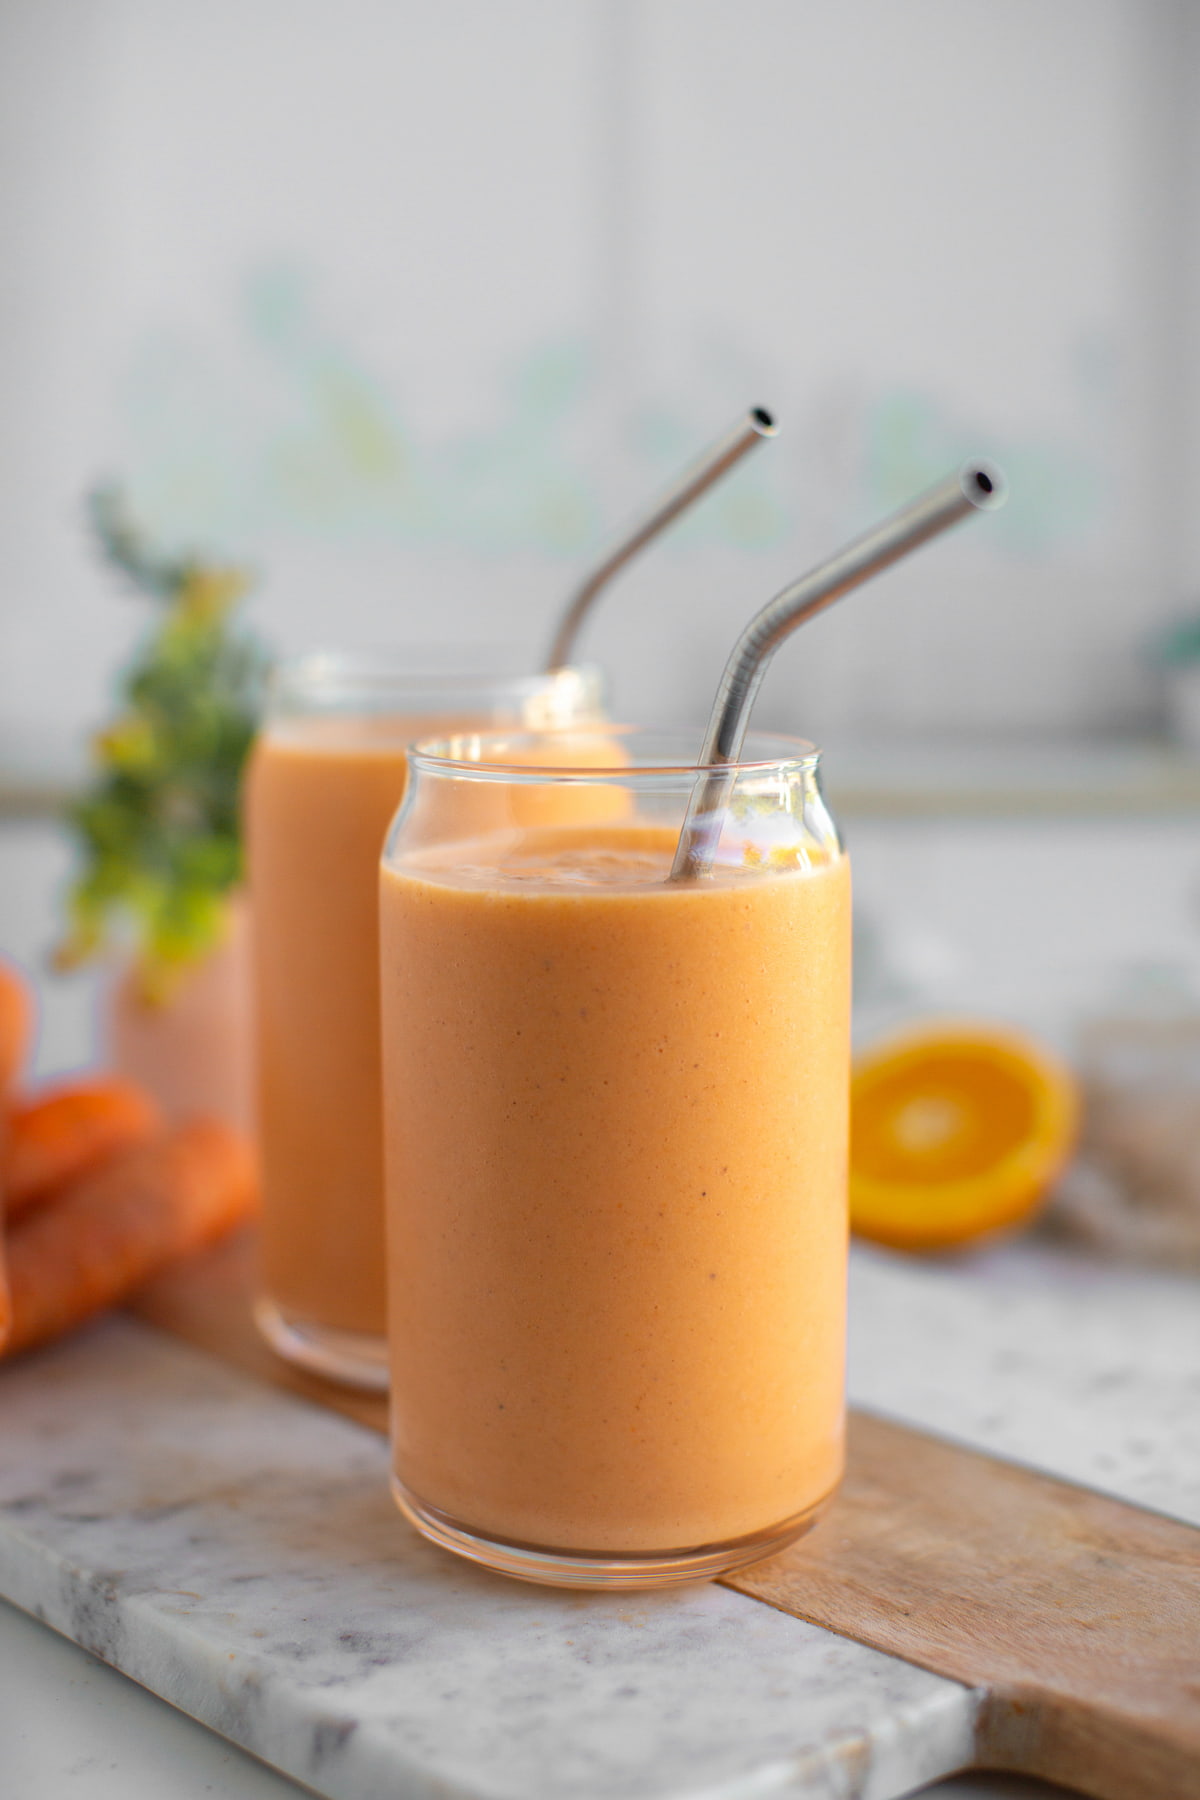 Carrot smoothies in glass cups with metal straws.